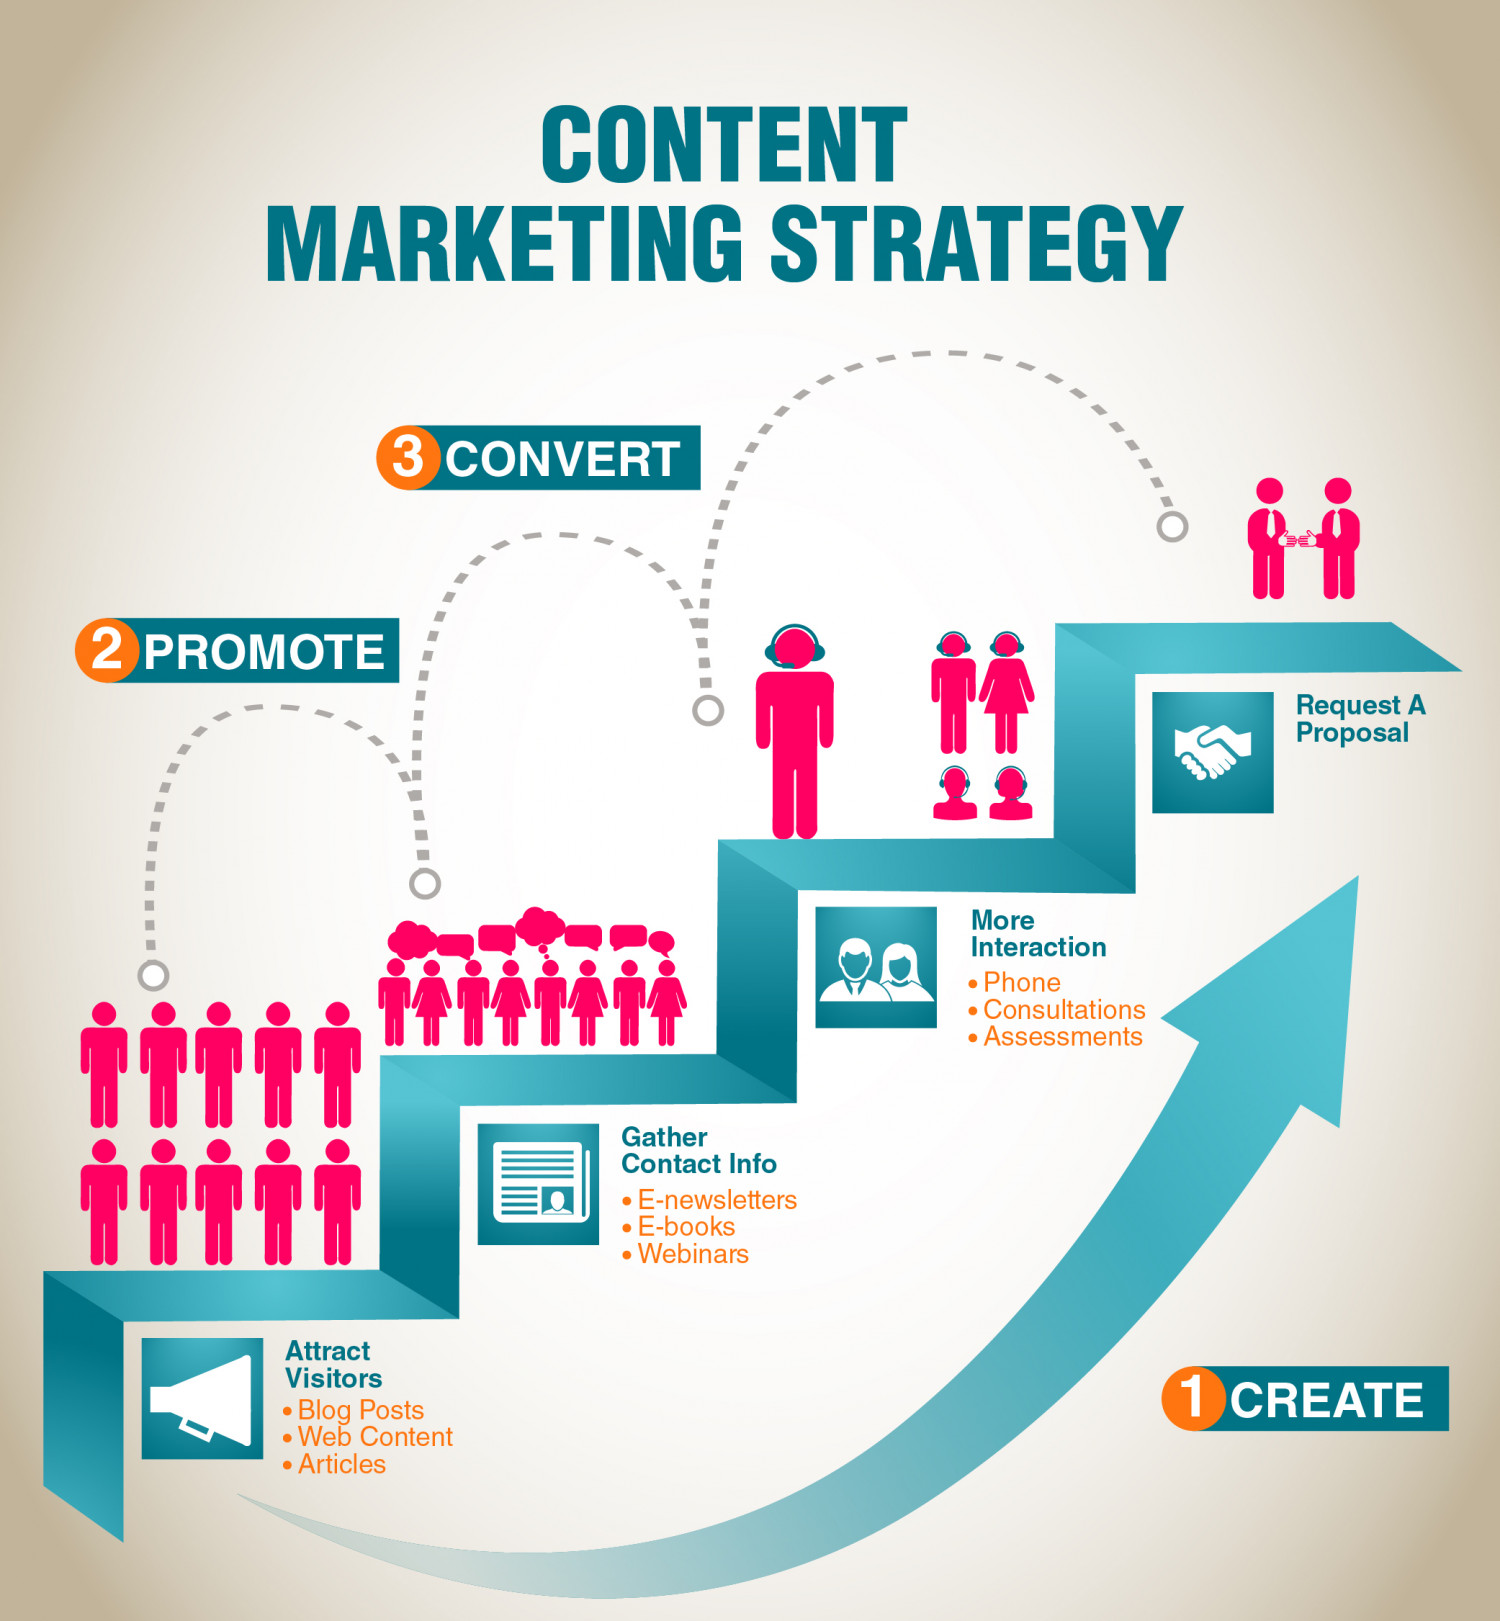 10 Easy Steps to Crafting a Successful Content Strategy [Infographic] - Business 2 Community